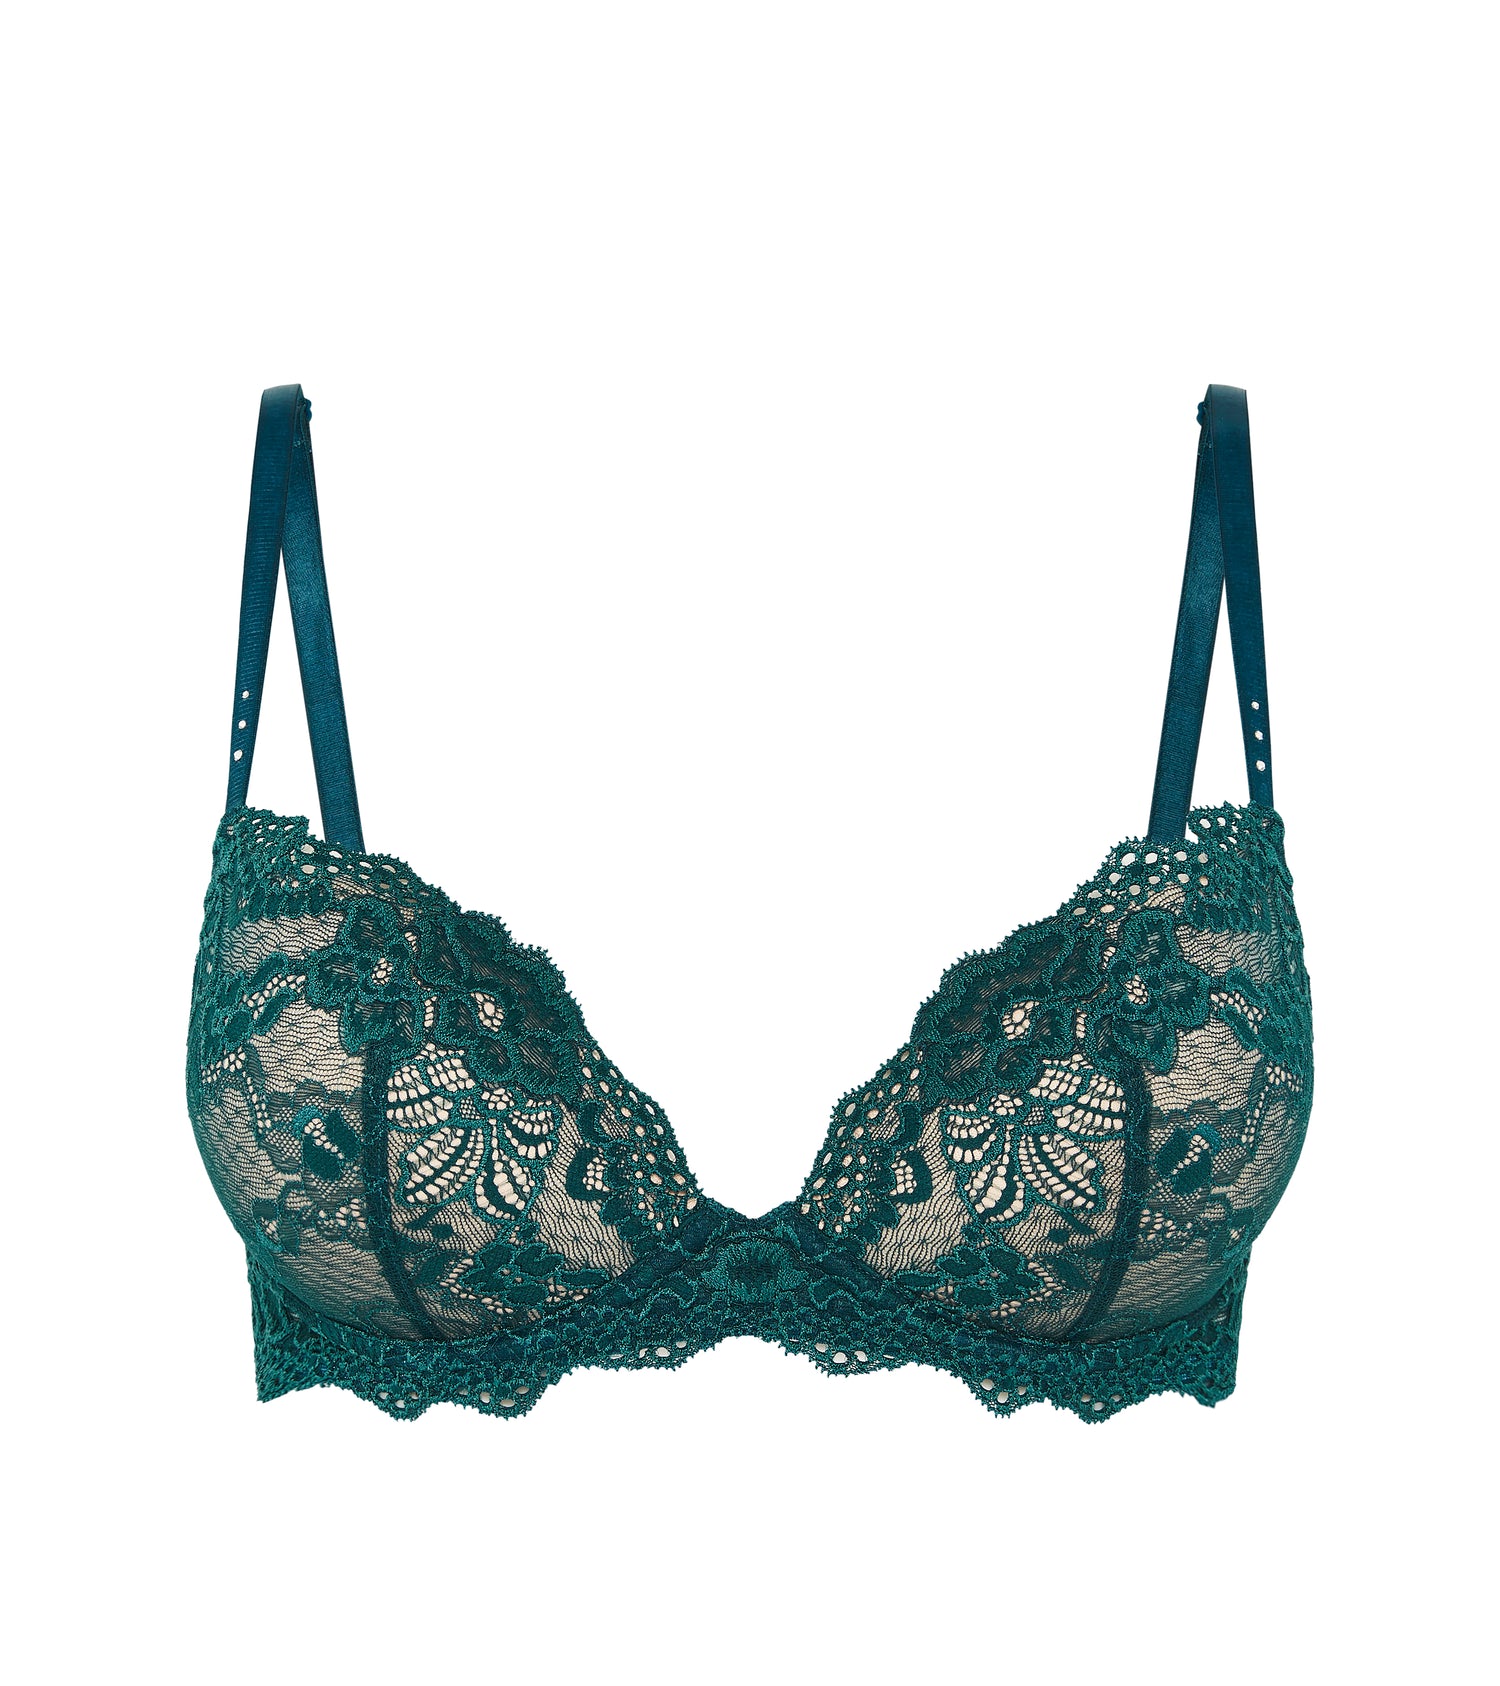 Buy A-GG Turquoise Supersoft Lace Full Cup Padded Bra - 38D, Bras